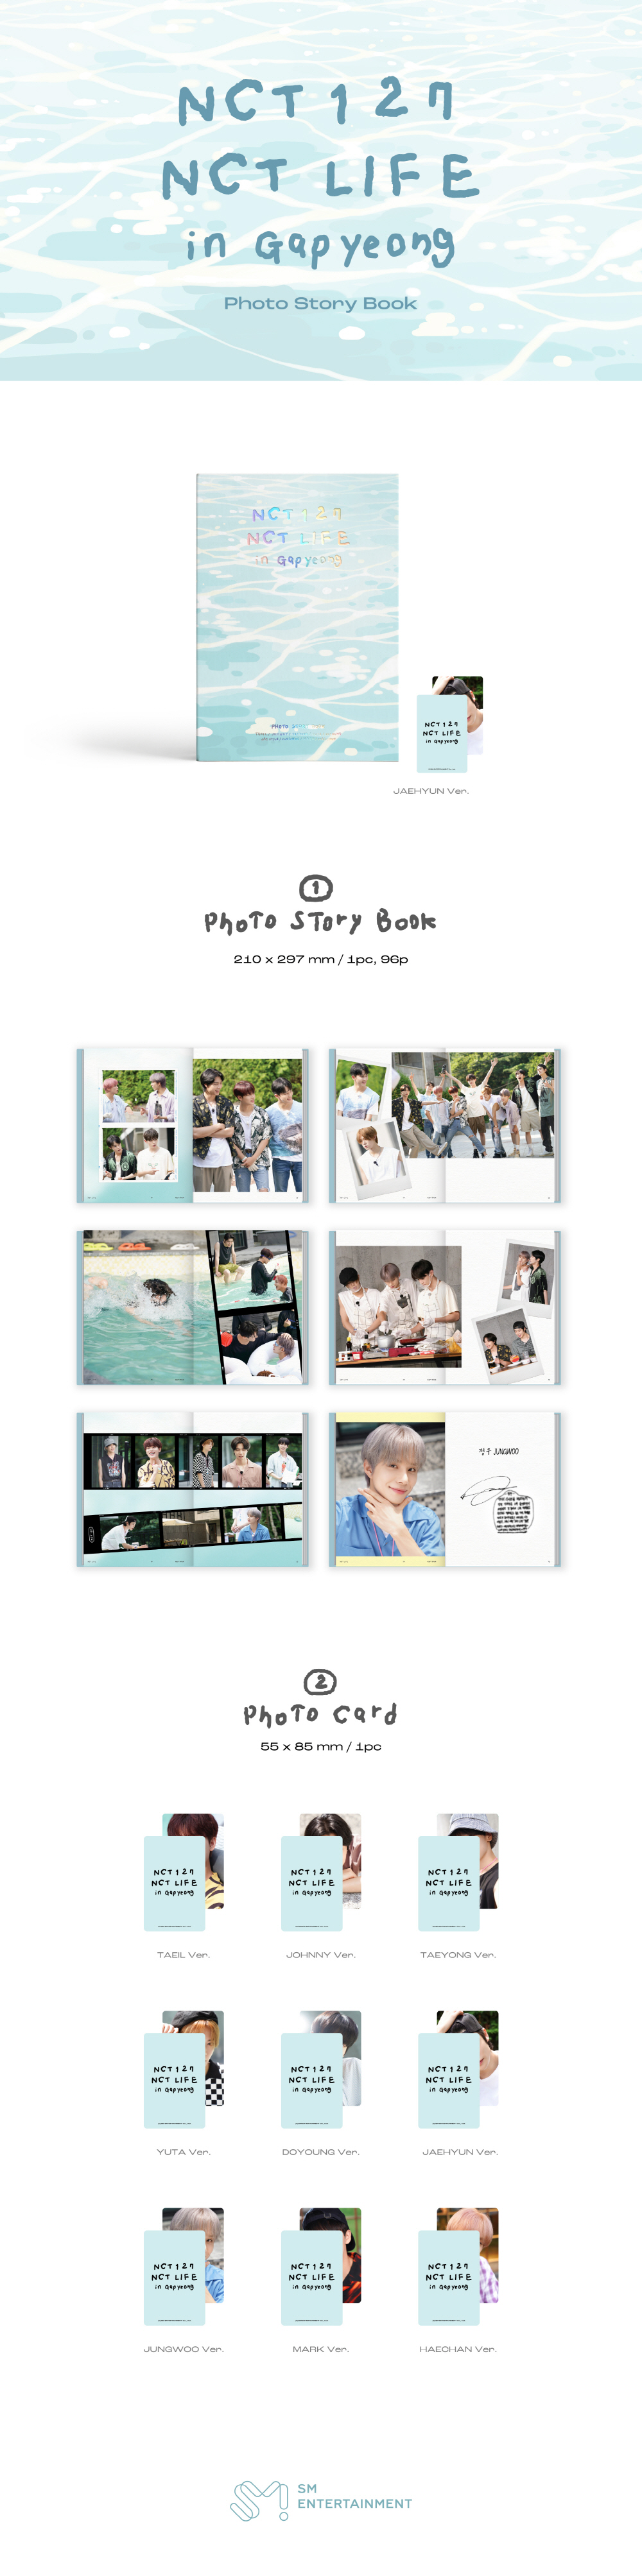 NCT 127 [NCT LIFE in Gapyeong] PHOTO STORY BOOK (HAECHAN) nct127 photobook nct127goods nct127photocard NCT127Gapyeong Gapyeong PHOTOSTORYBOOK NCT127photobook NCT127photostorybook